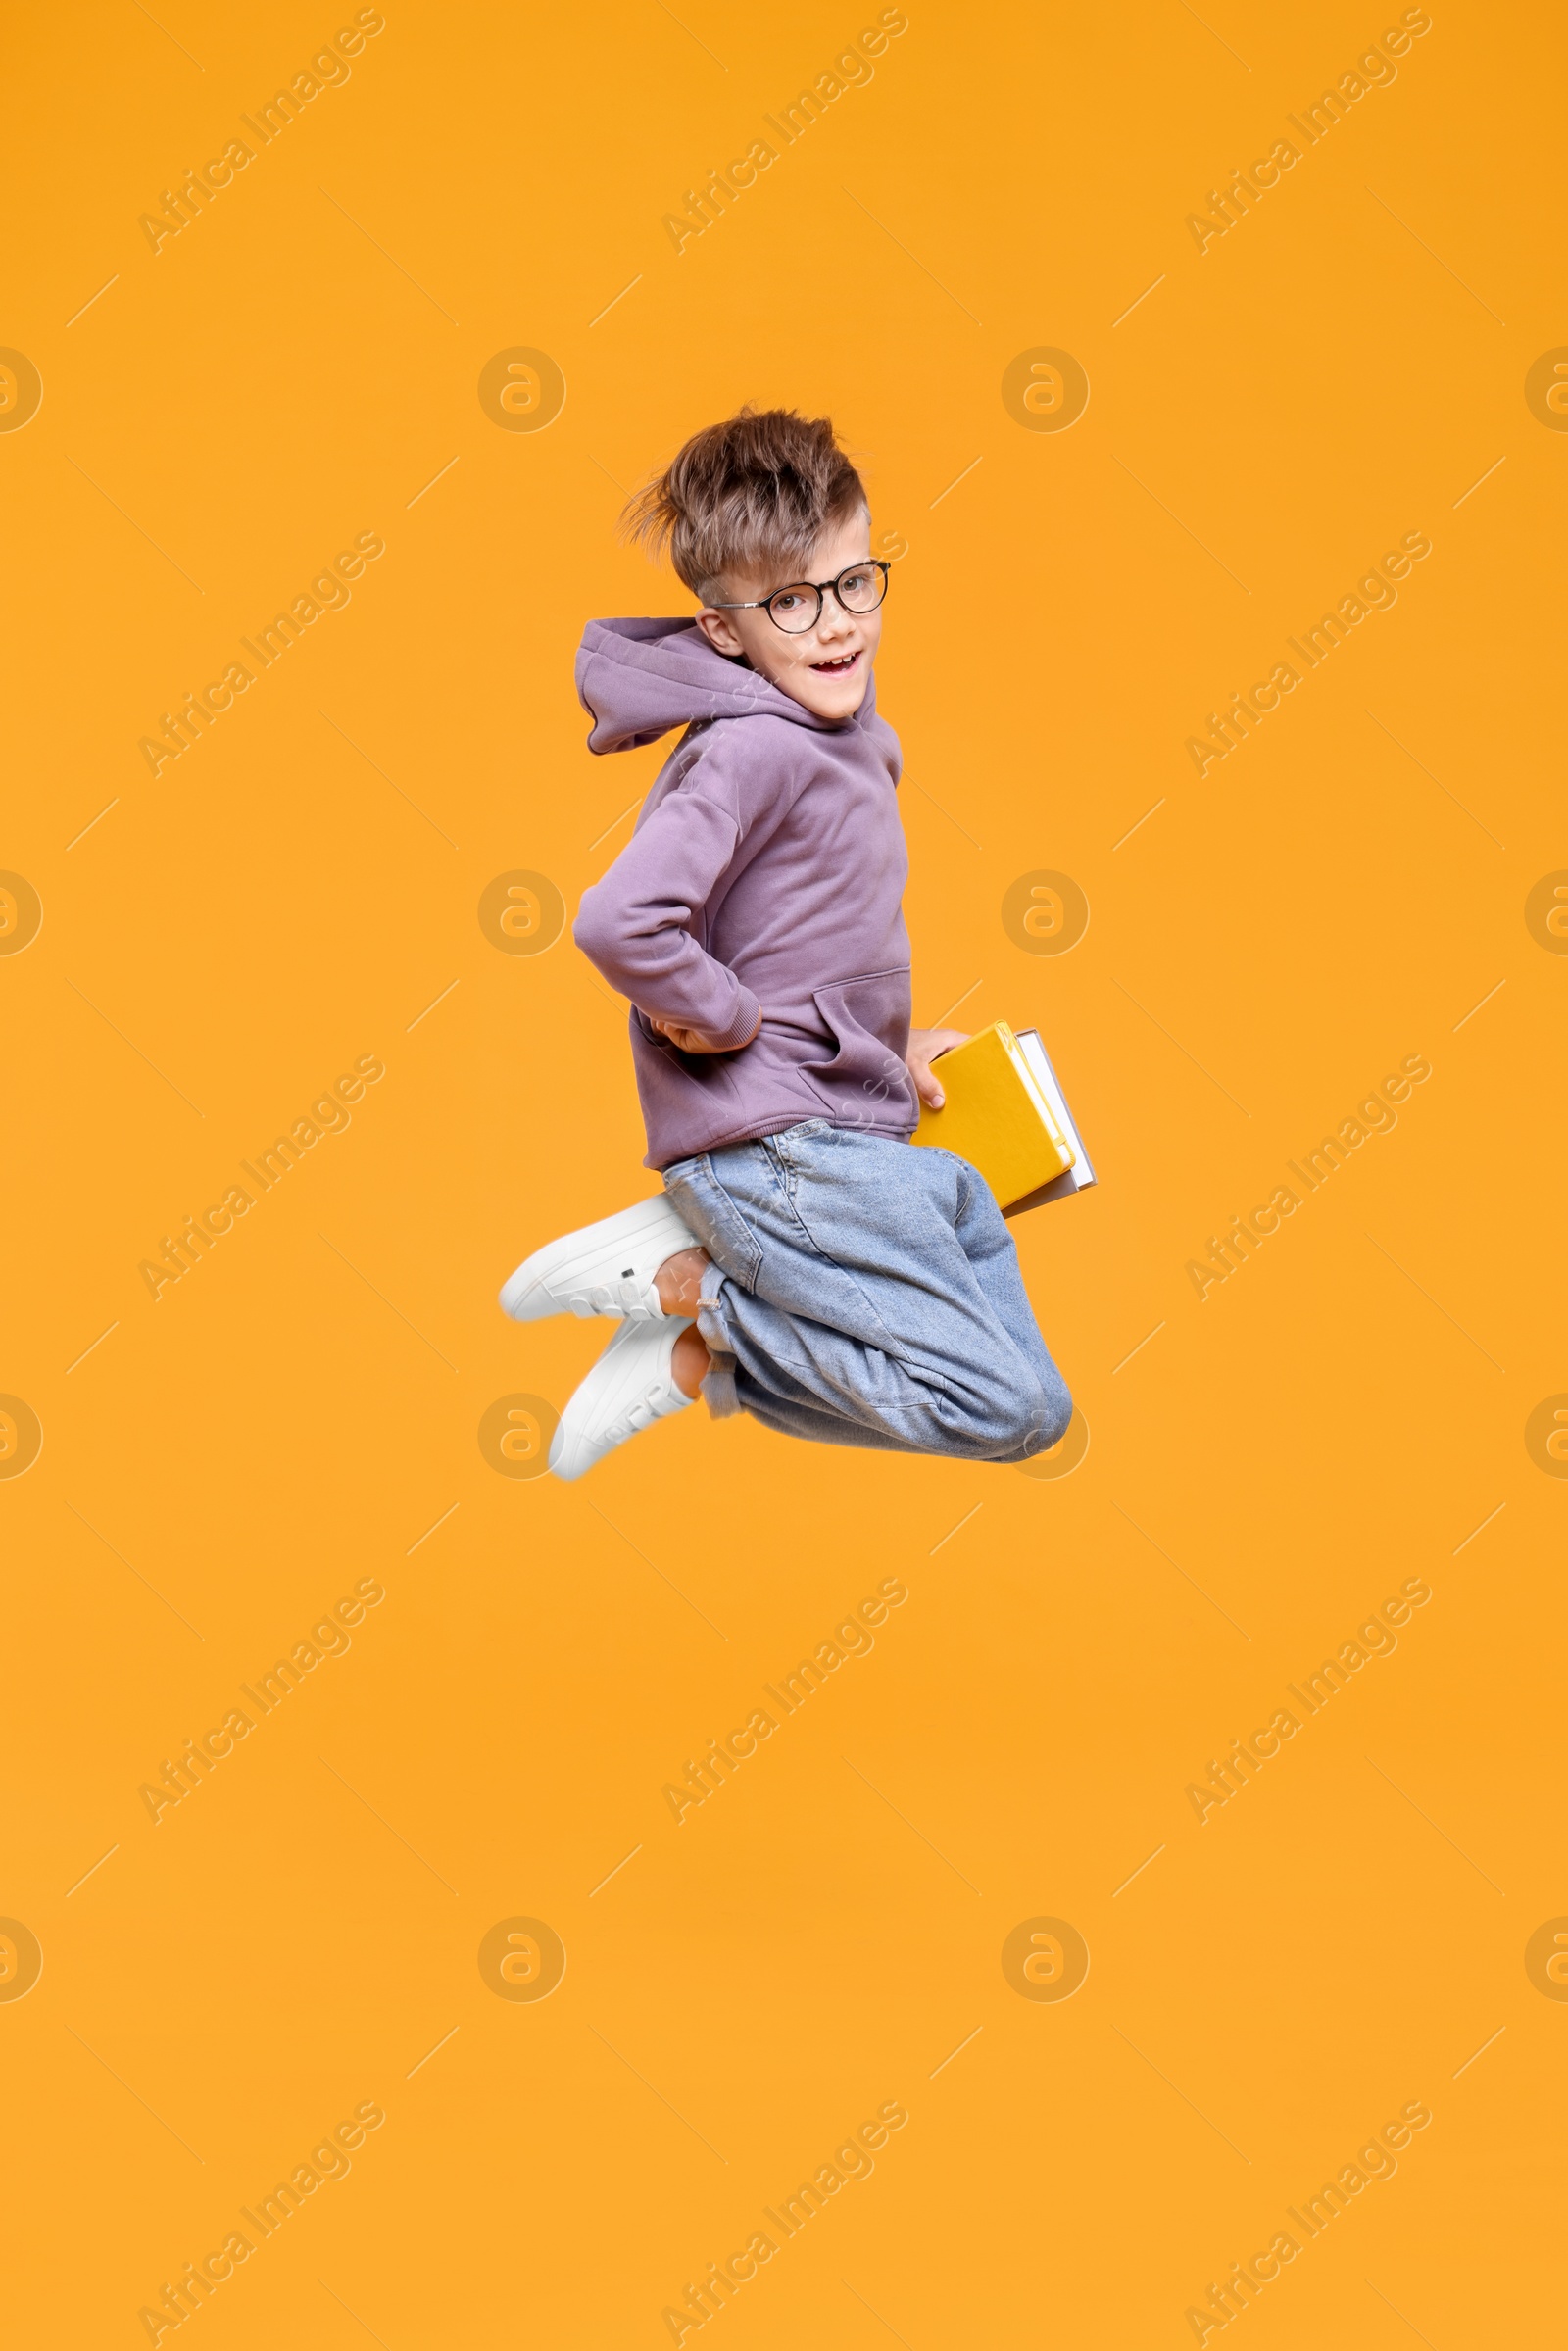 Photo of Cute schoolboy with books jumping on orange background, space for text